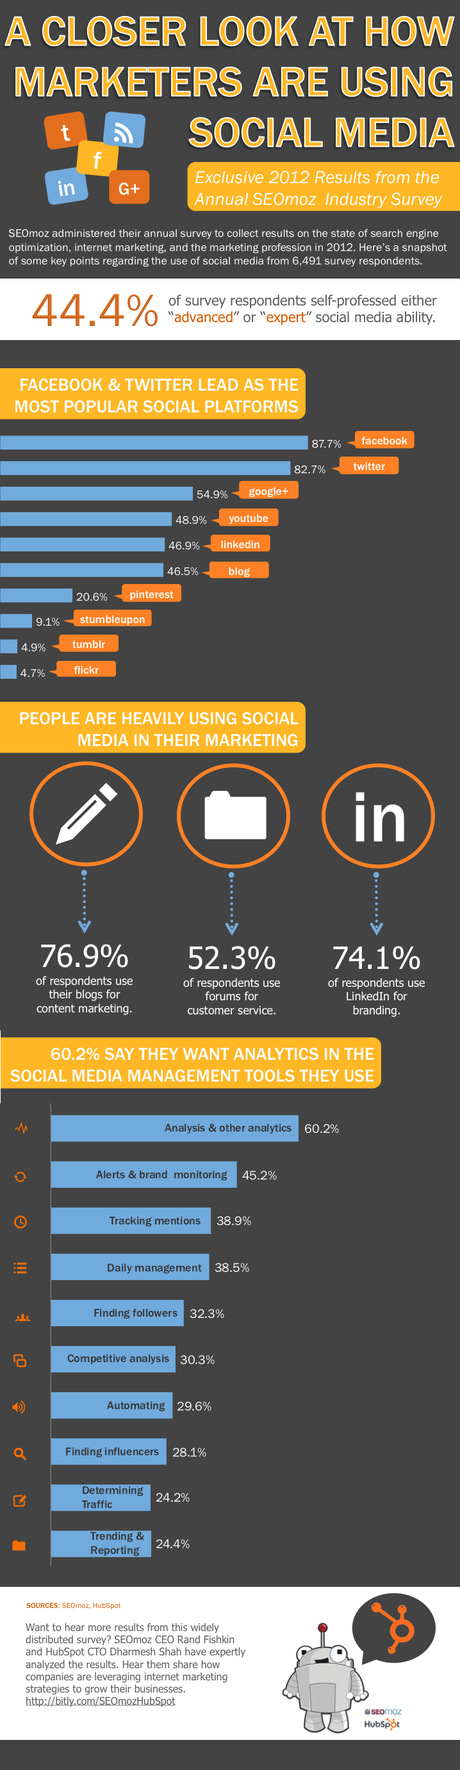 A Closer Look at How Marketers Are Using Social Media [Infographic]